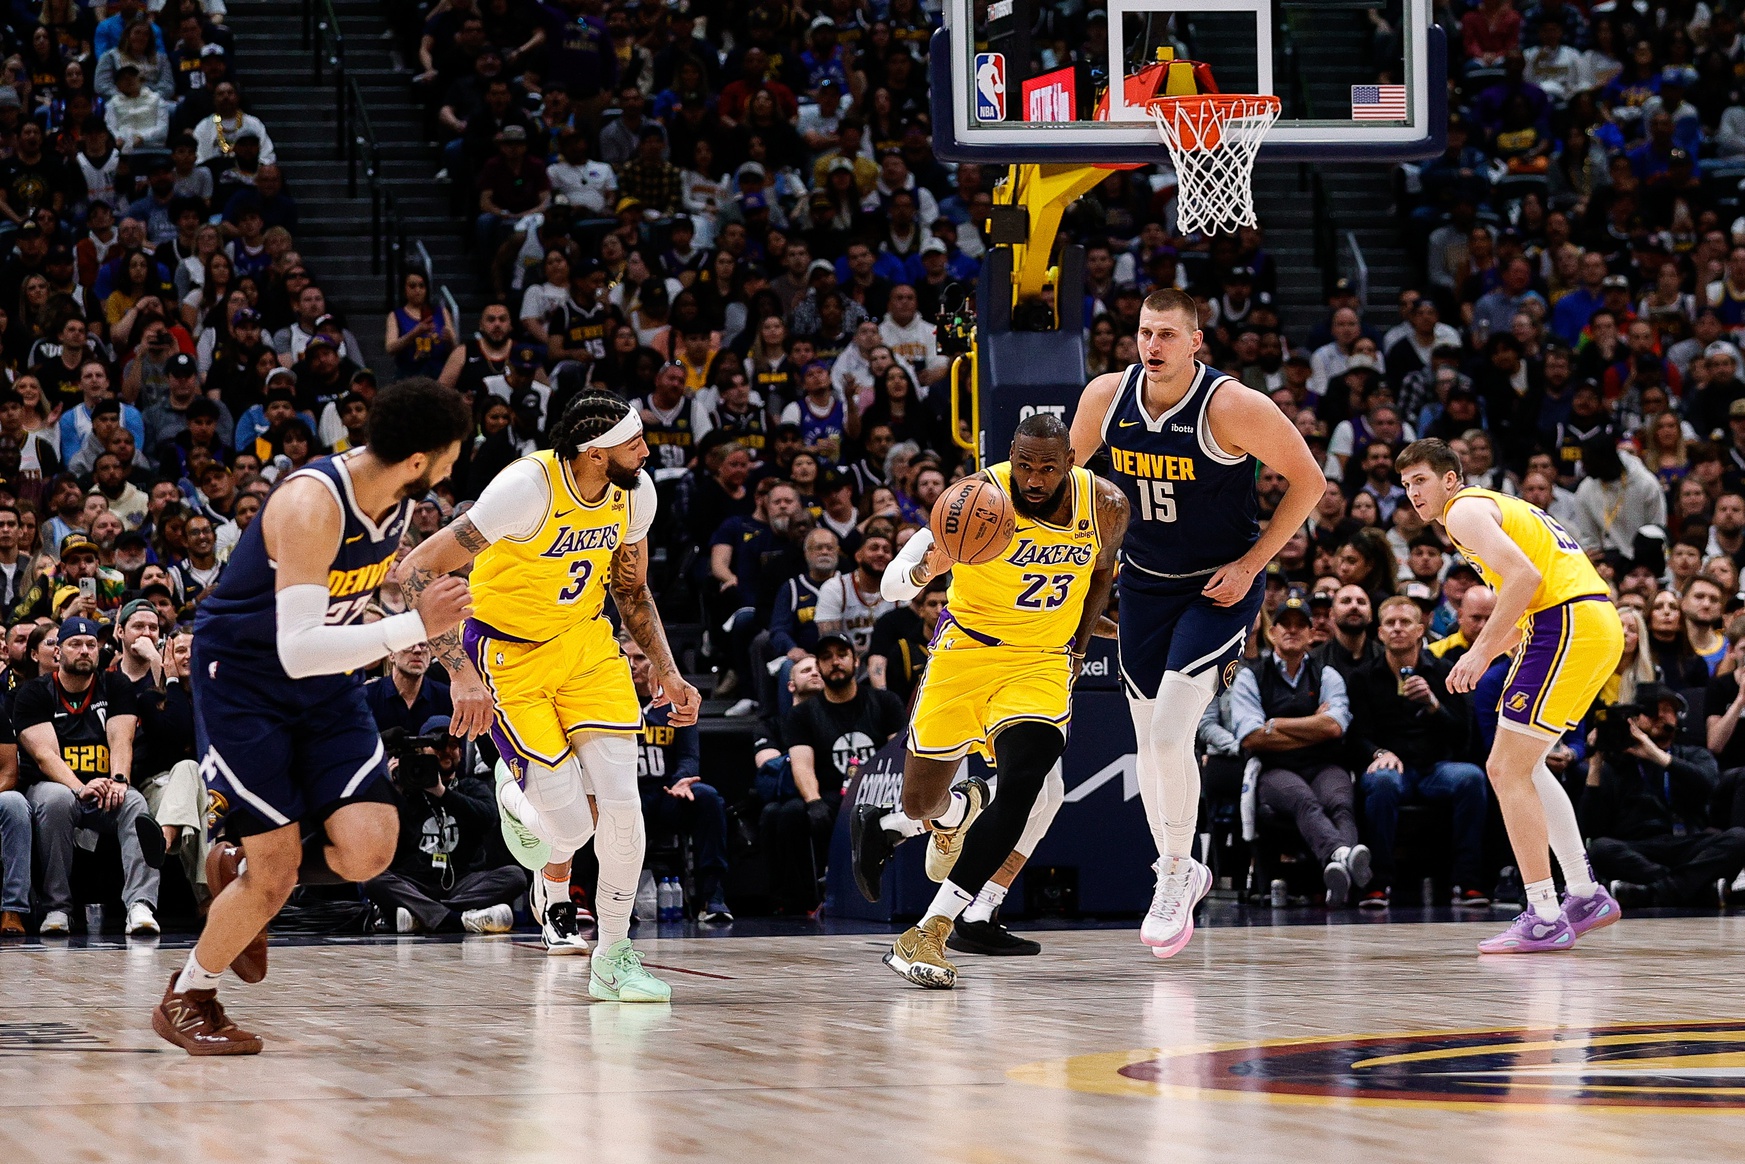 Los Angeles Lakers stars LeBron James and Anthony Davis lead a fast break